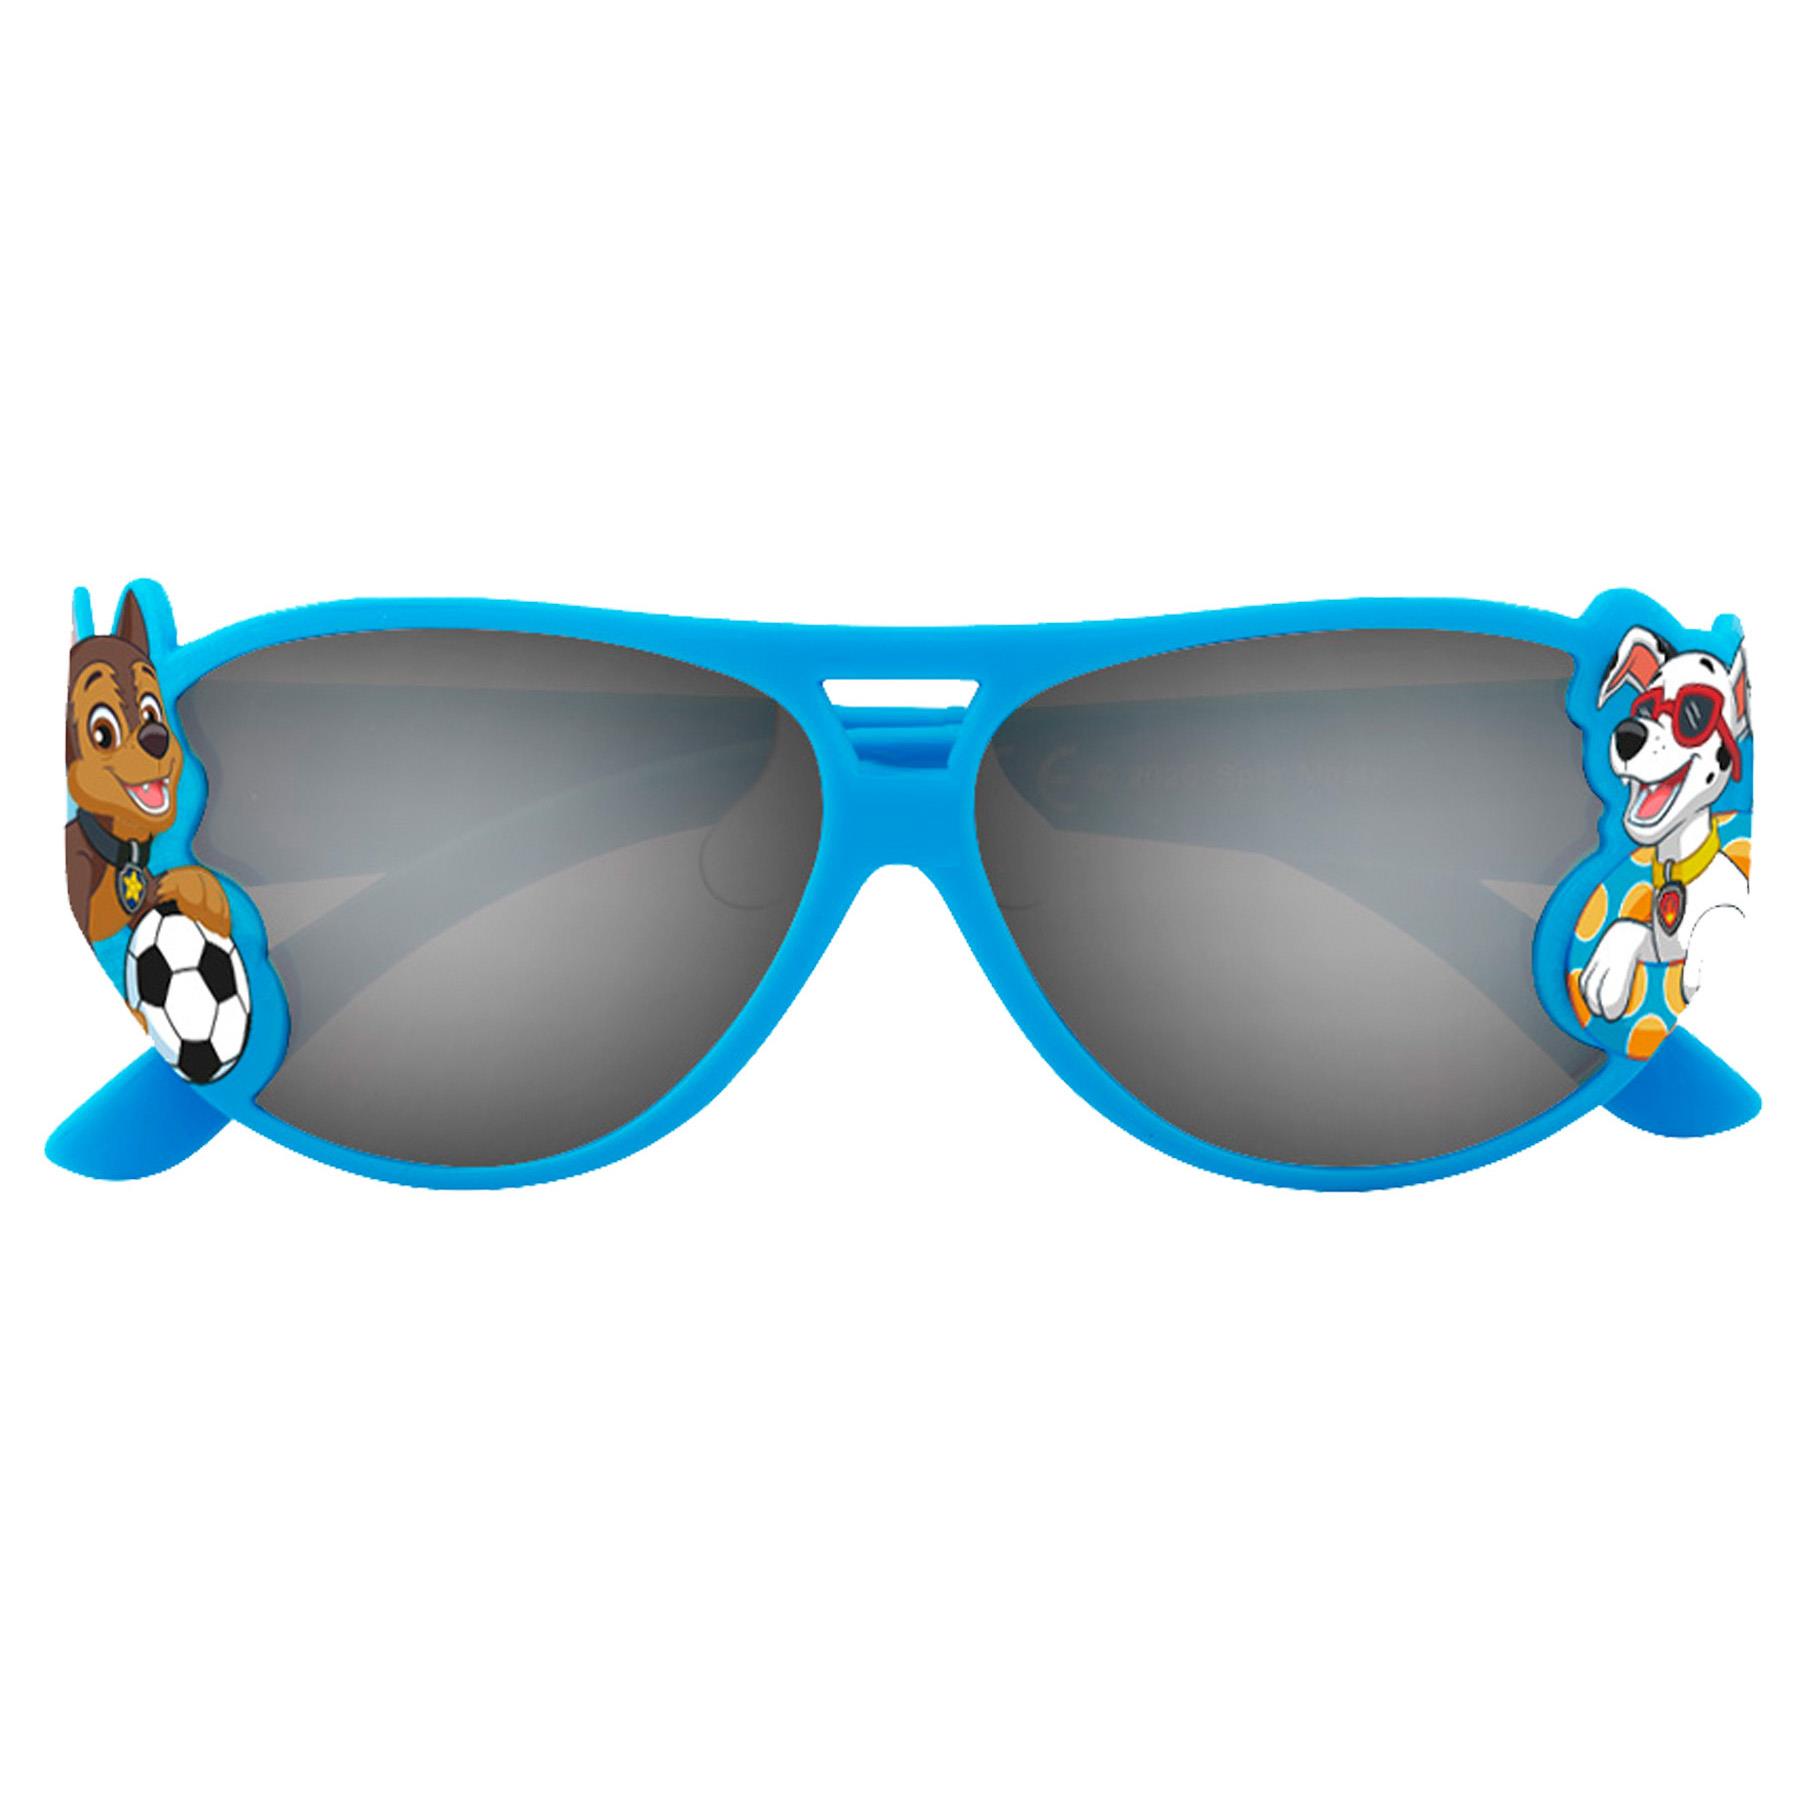 Paw Patrol Children's Sunglasses UV protection for Holiday - PAW7